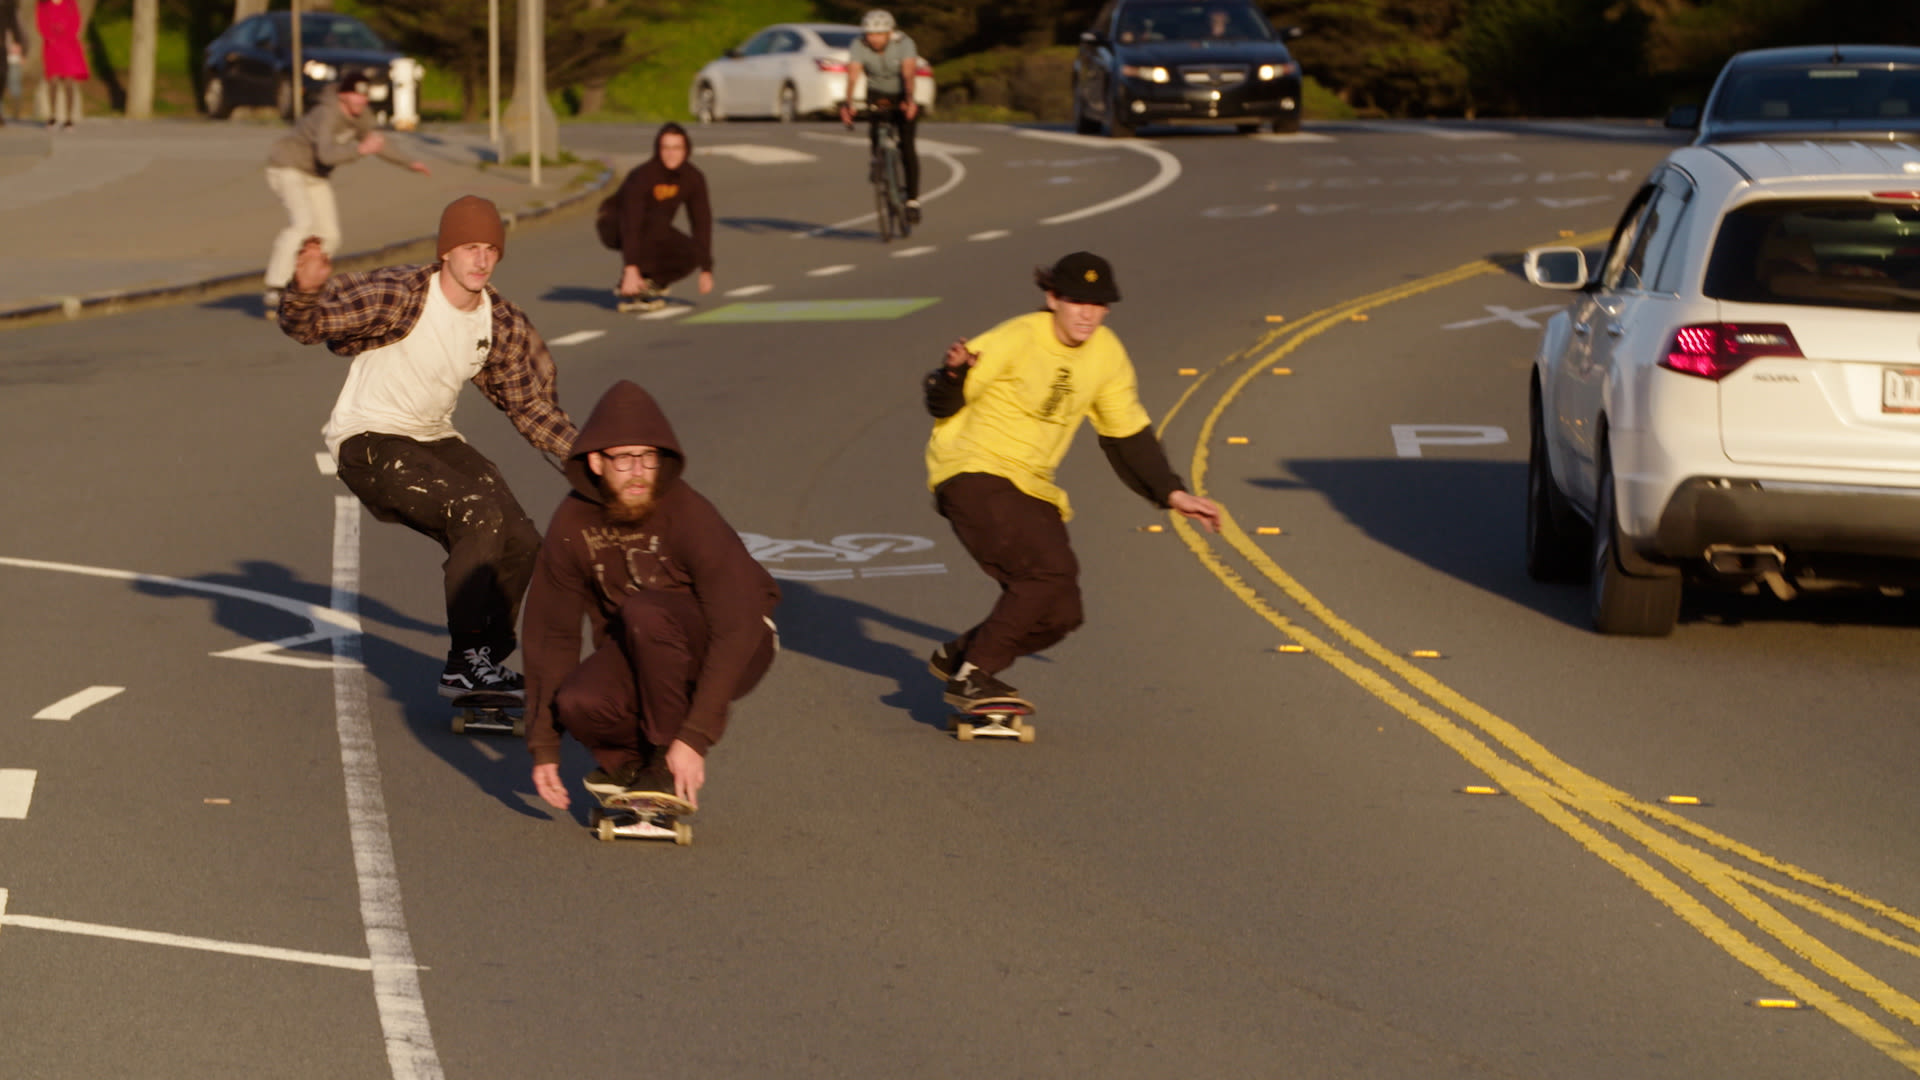 Watch Taunting Death, Transcendence, and Bombing Hills on Skateboard | The New